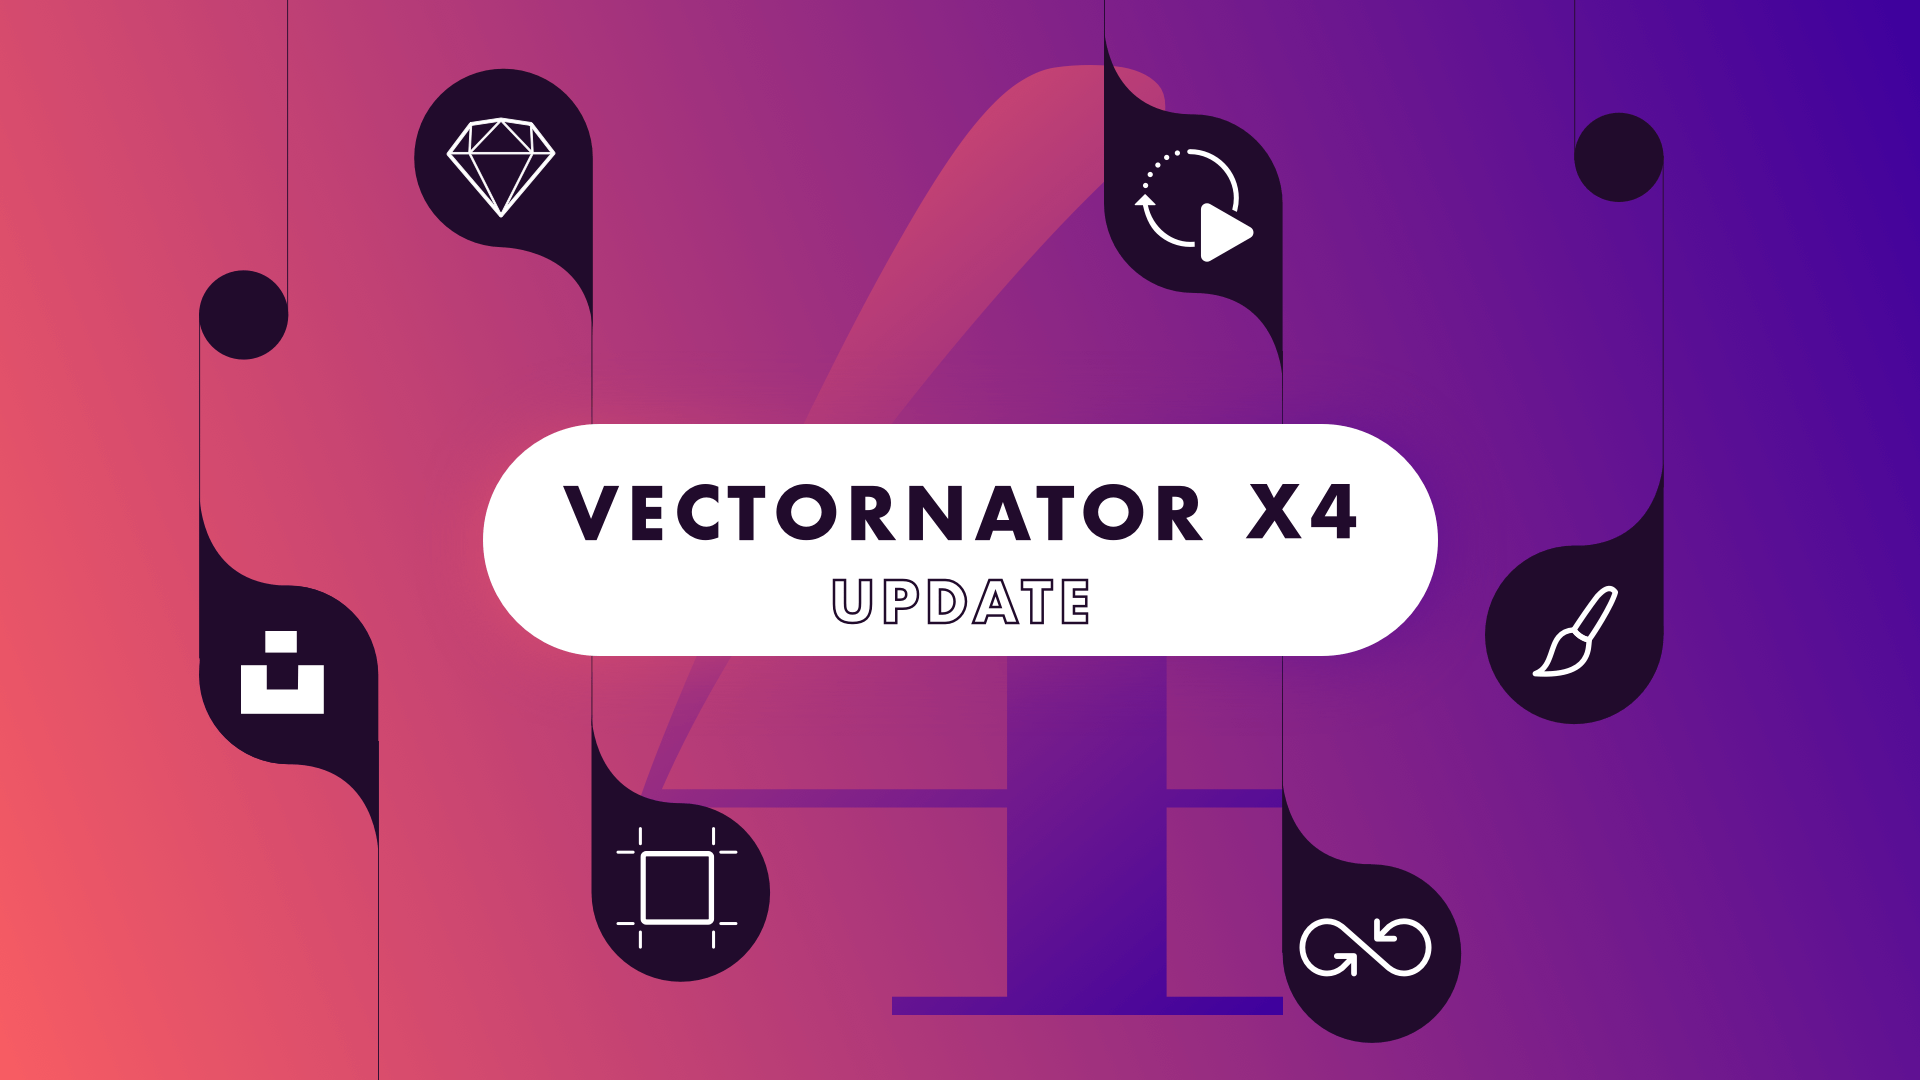 Introducing Vectornator X4 | Linearity Curve (formerly Vectornator)